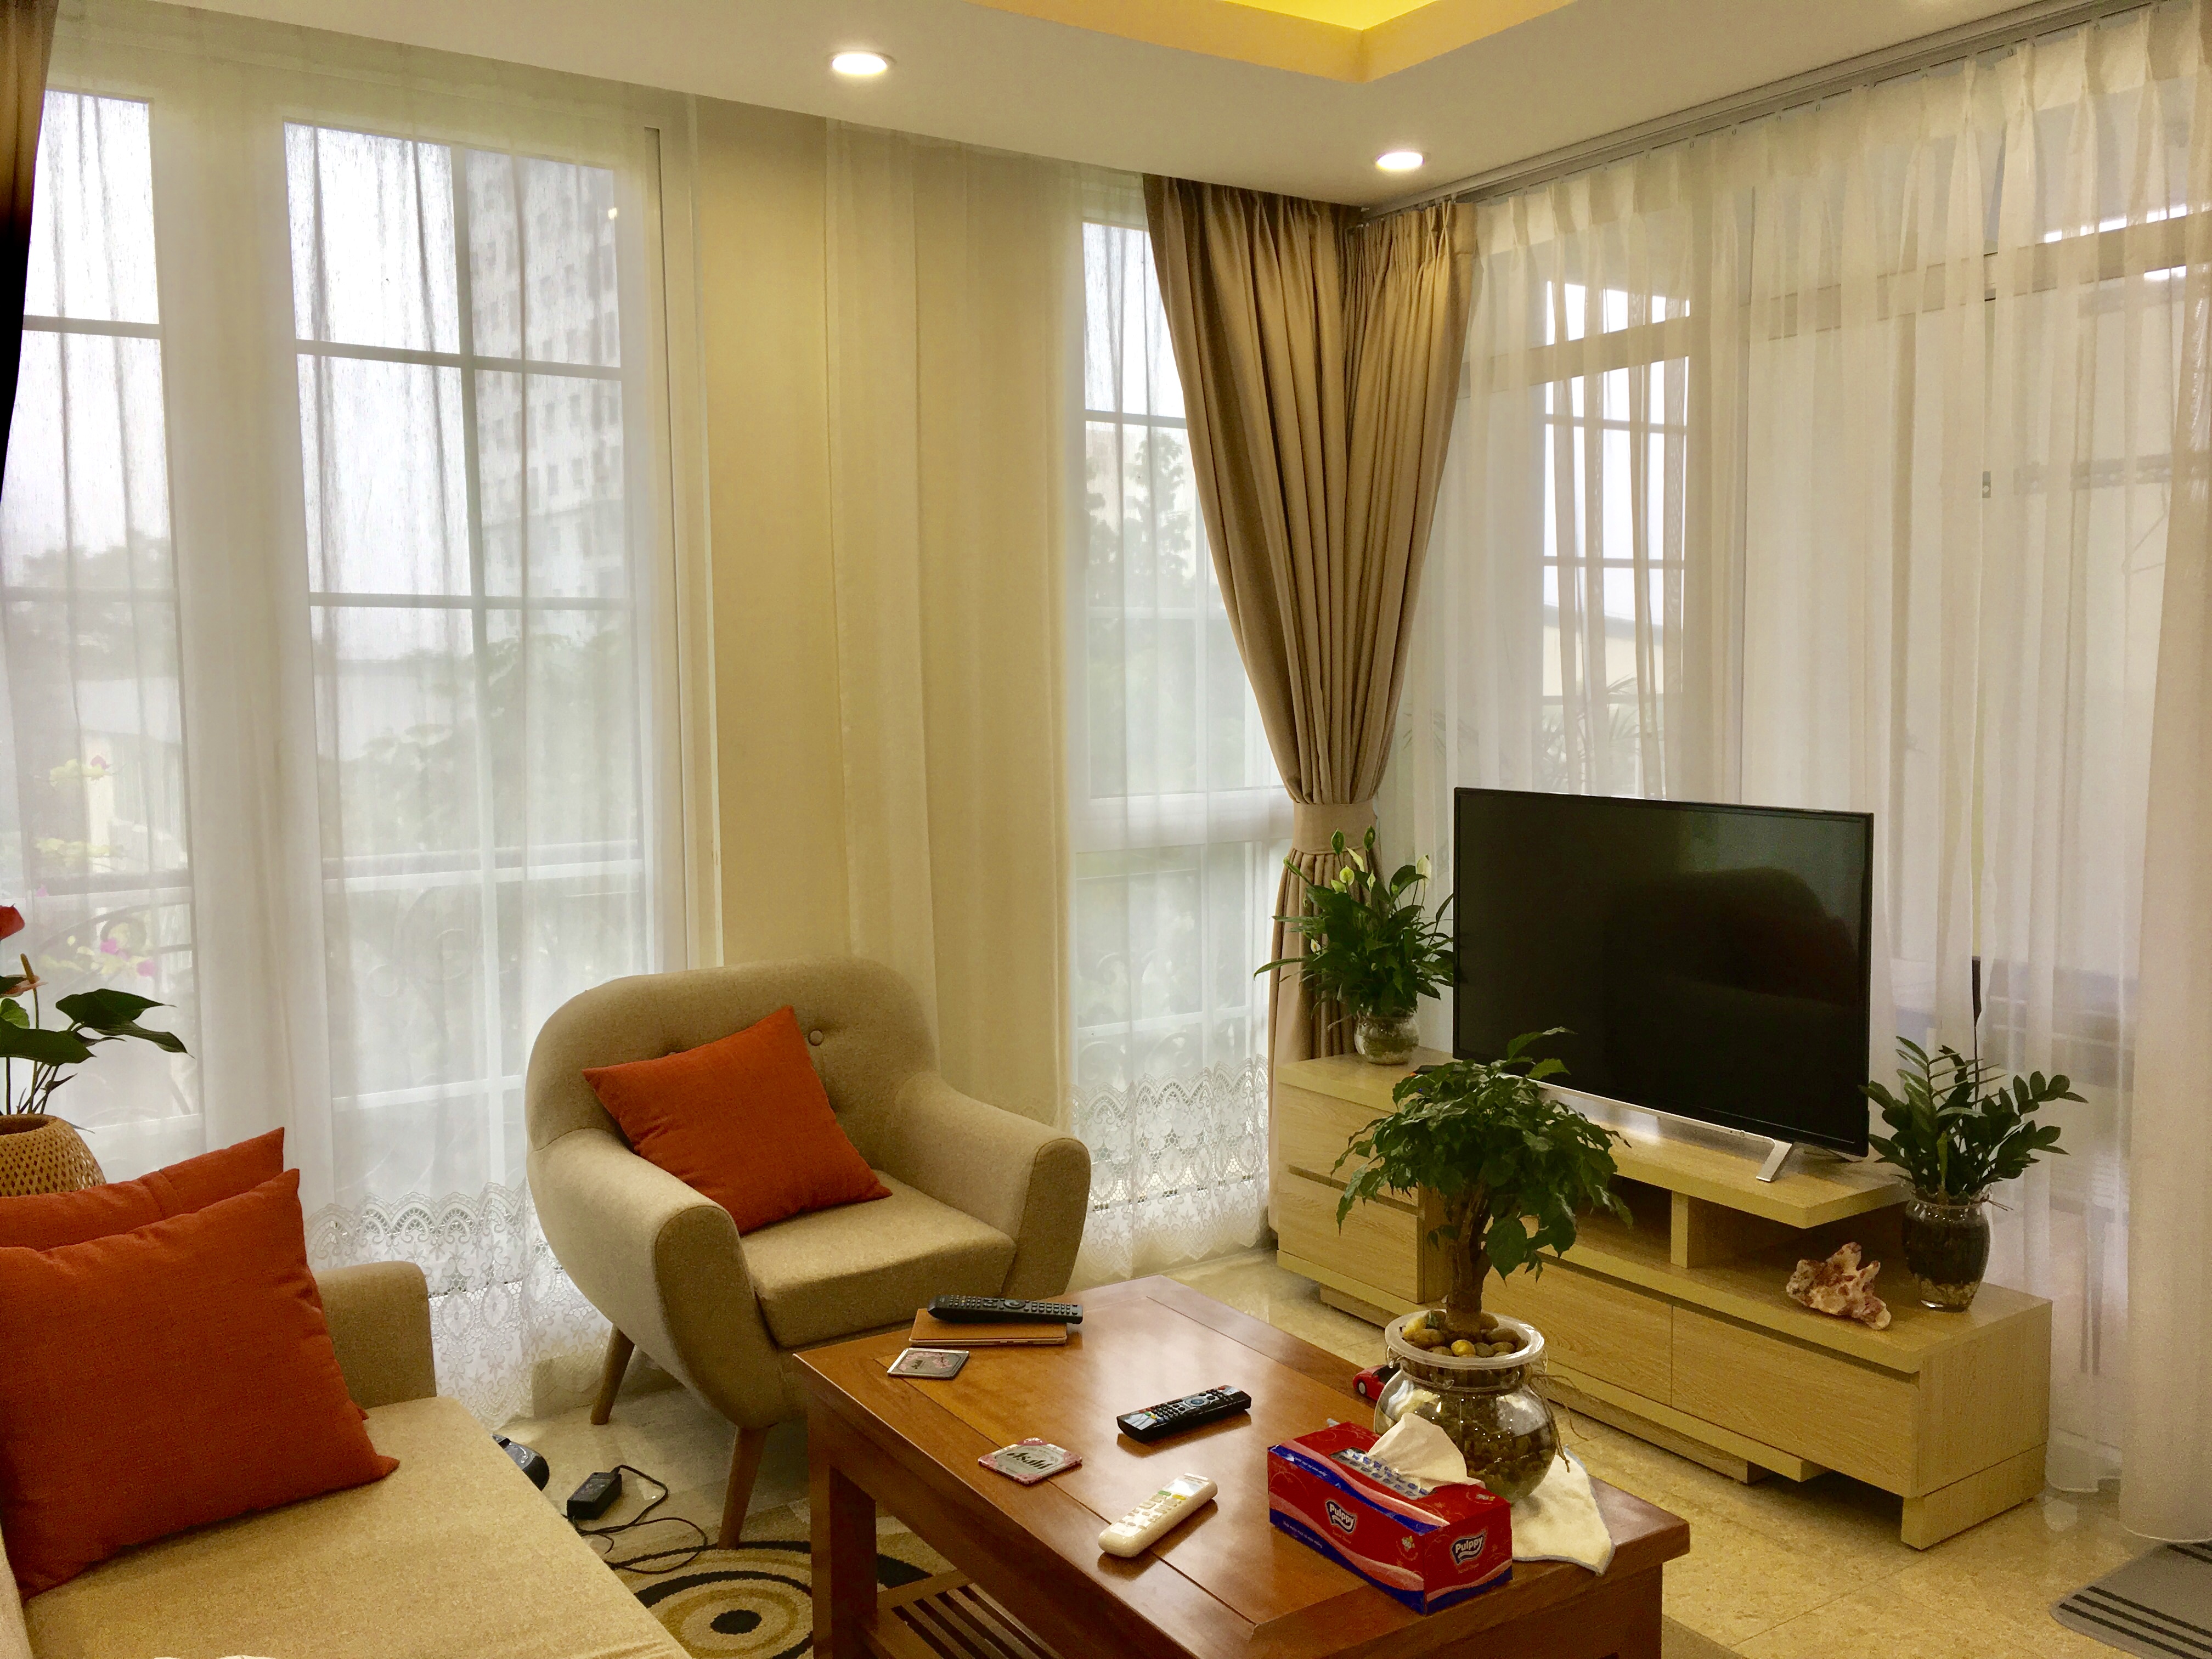 Serviced apartment 2 bedrooms, 4th floor(401), Giang Vo area.